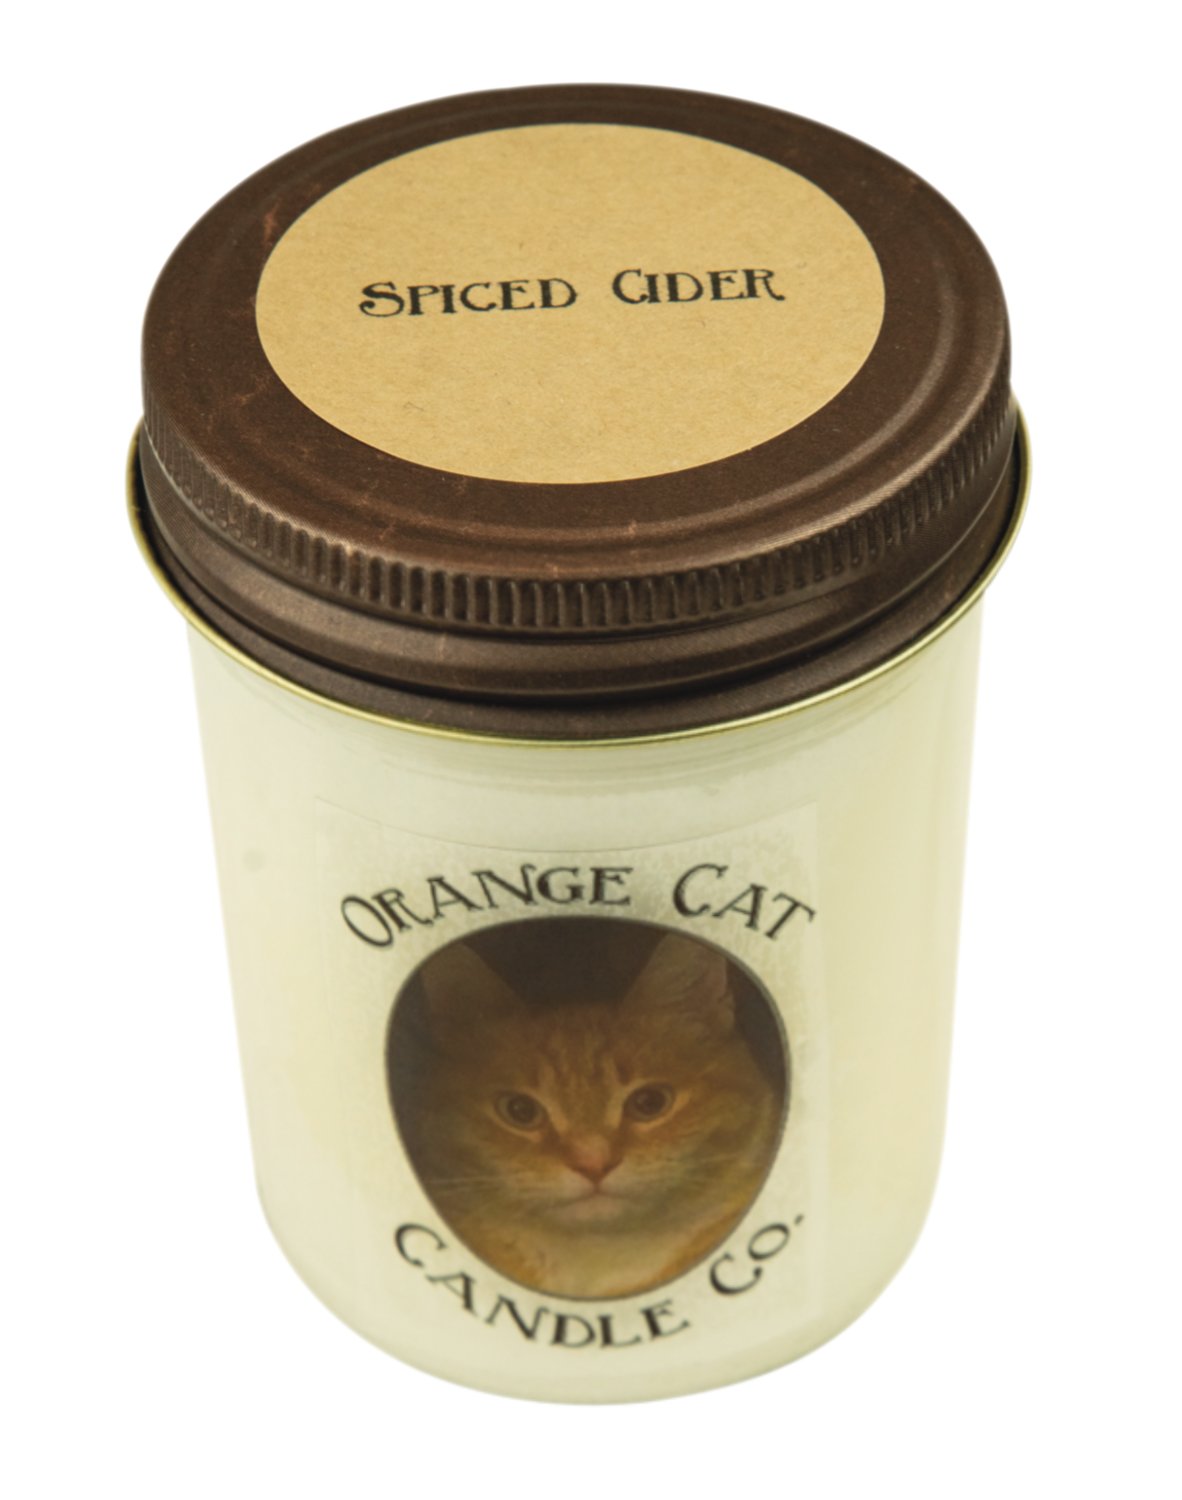 Orange Cat Candle Co.: Hemp-wicked, soy, non-toxic candles made with seasonal scents. 8 oz, $11.50.